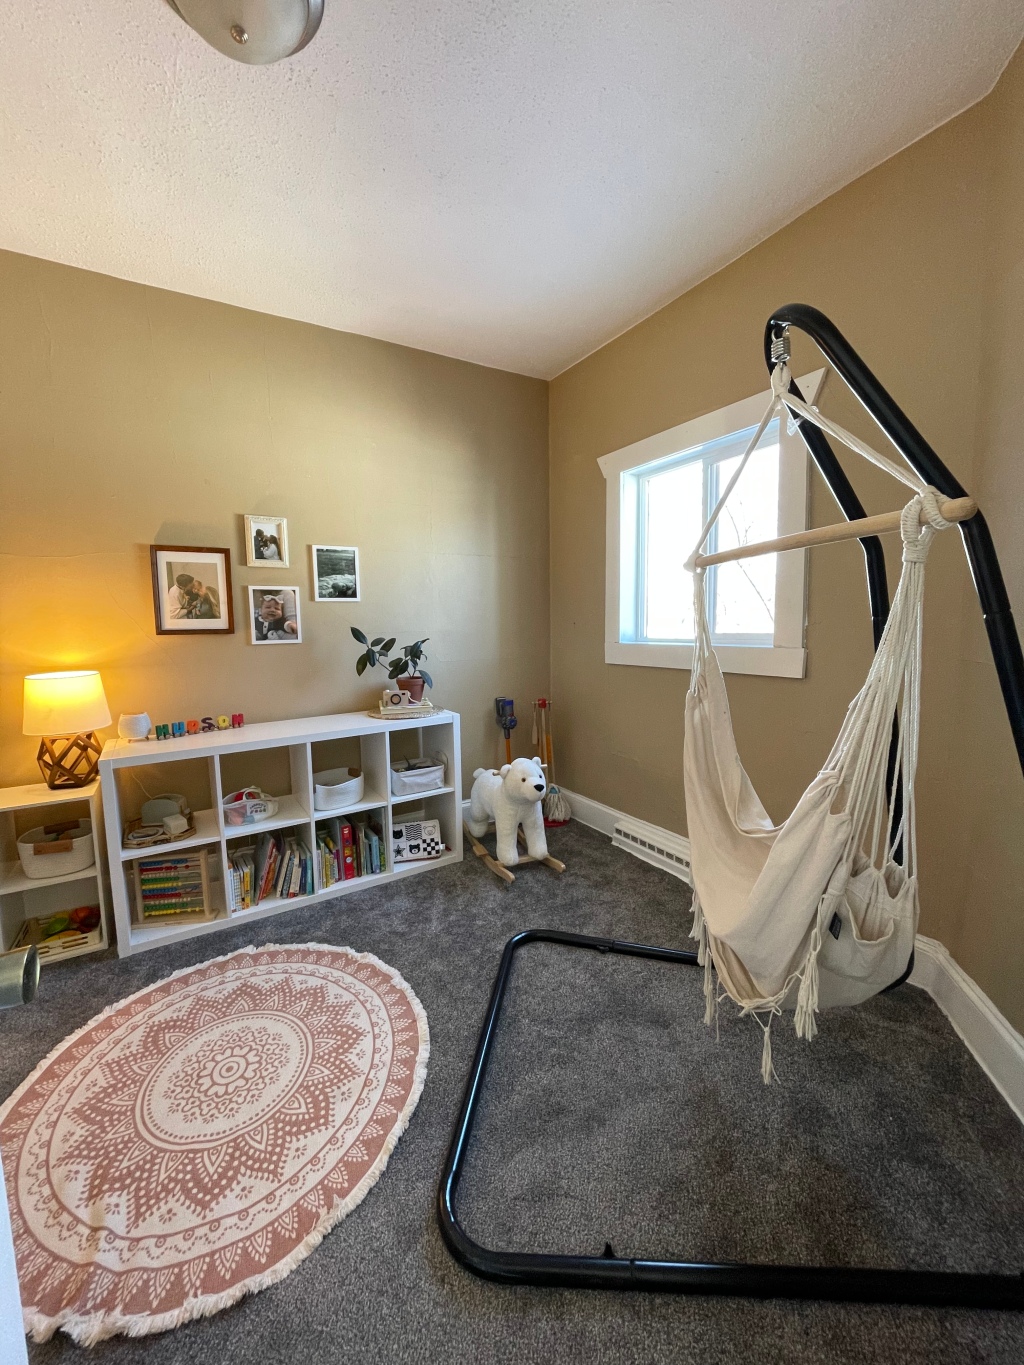 How To Make A Playroom An Enjoyable & Effective Space For Your Kids